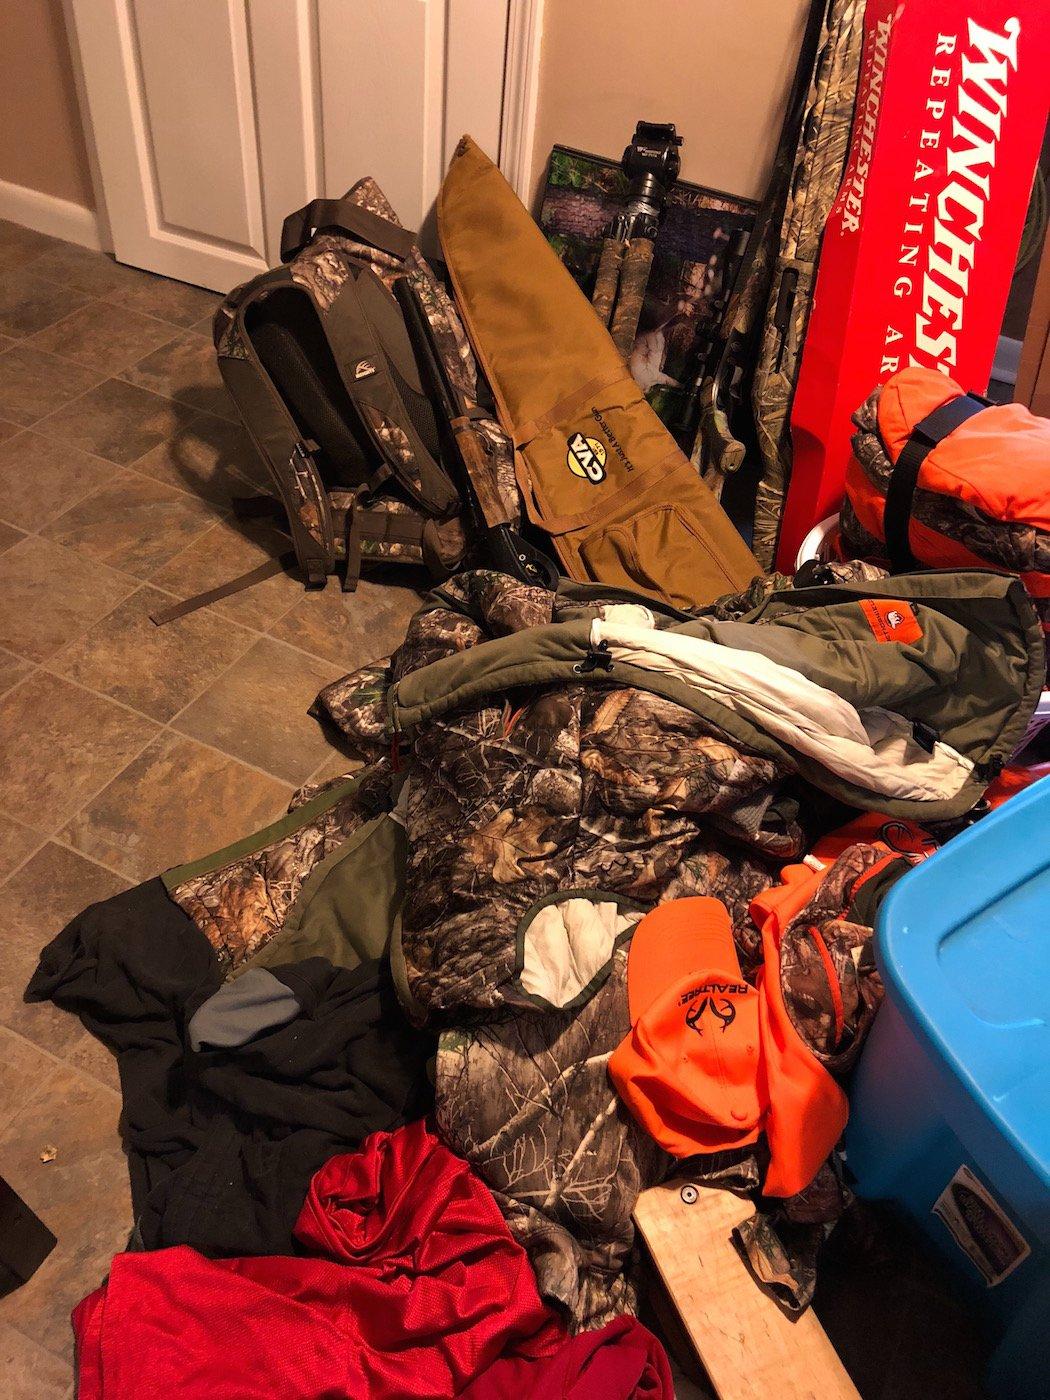 You Leave Hunting Gear All Over the Place